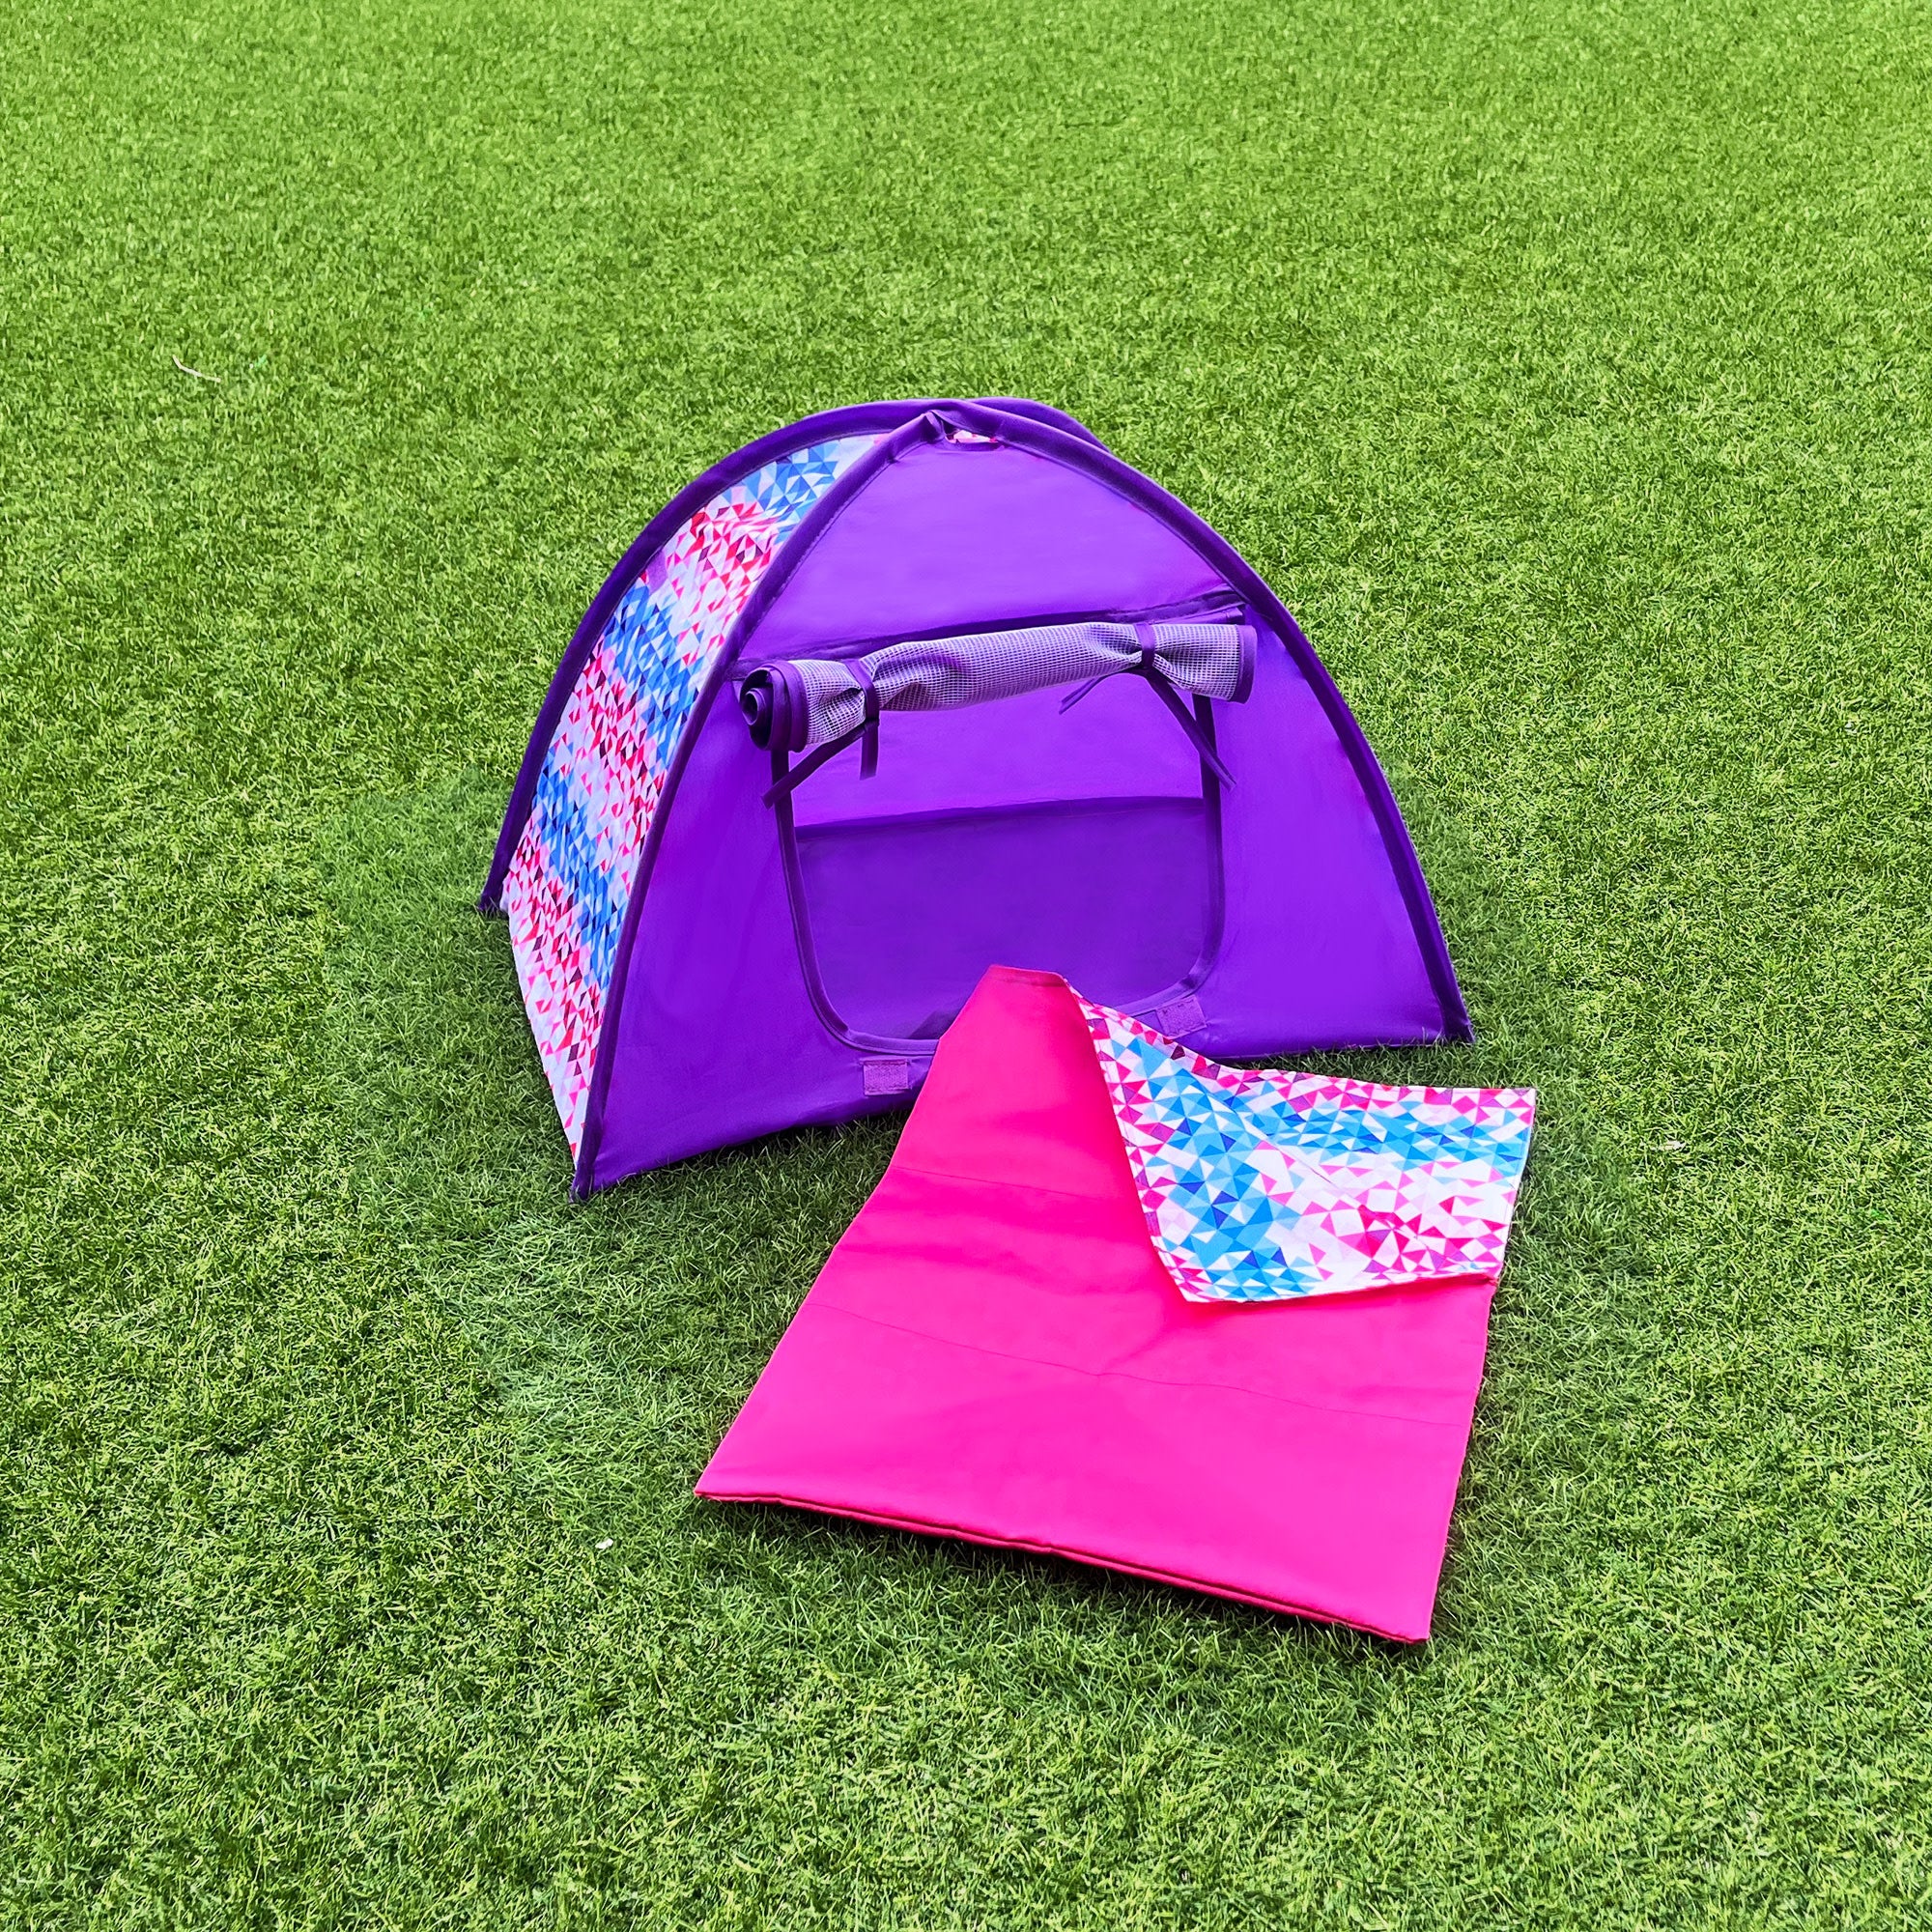 Sophia's by Teamson Kids Camping Tent and Sleeping Bag Set for 18" Dolls, Purple/Pink